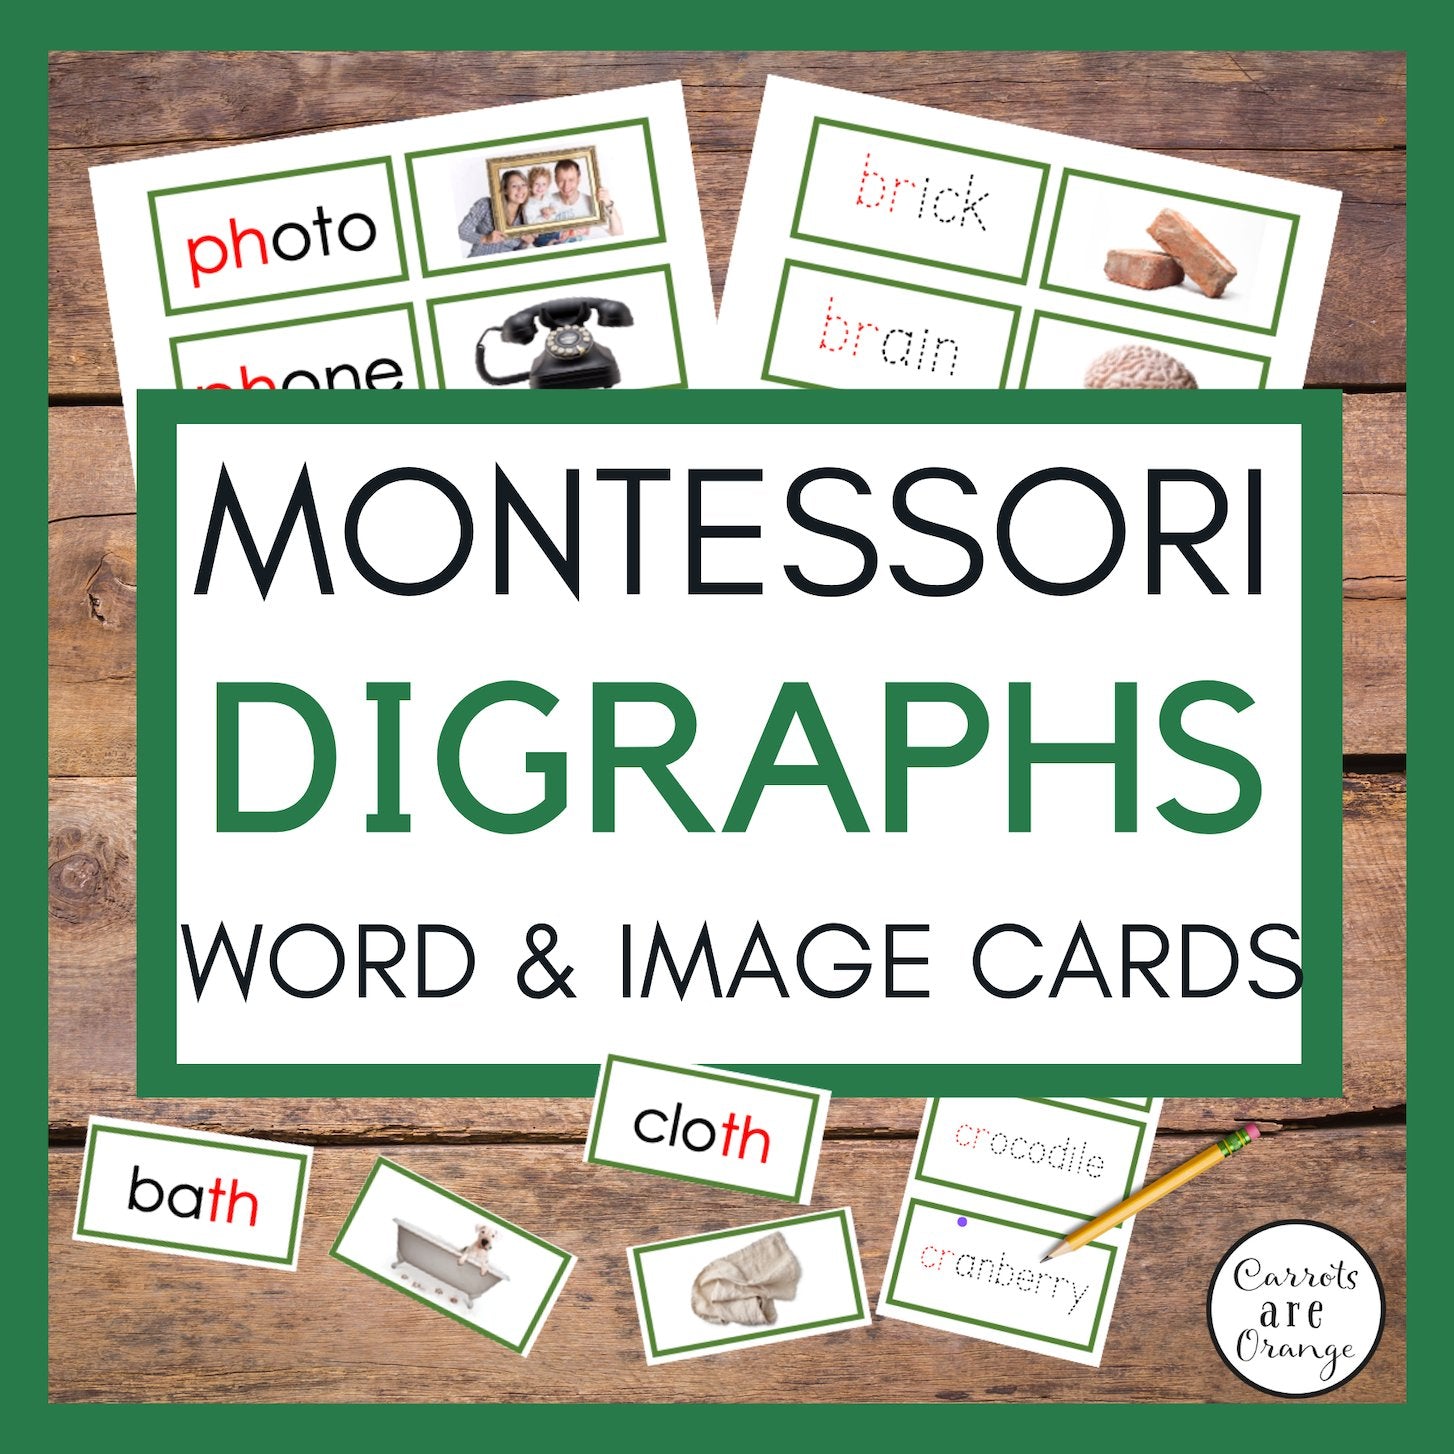 [Green Level] Digraph Word Label & Image Cards - Printables by Carrots Are Orange